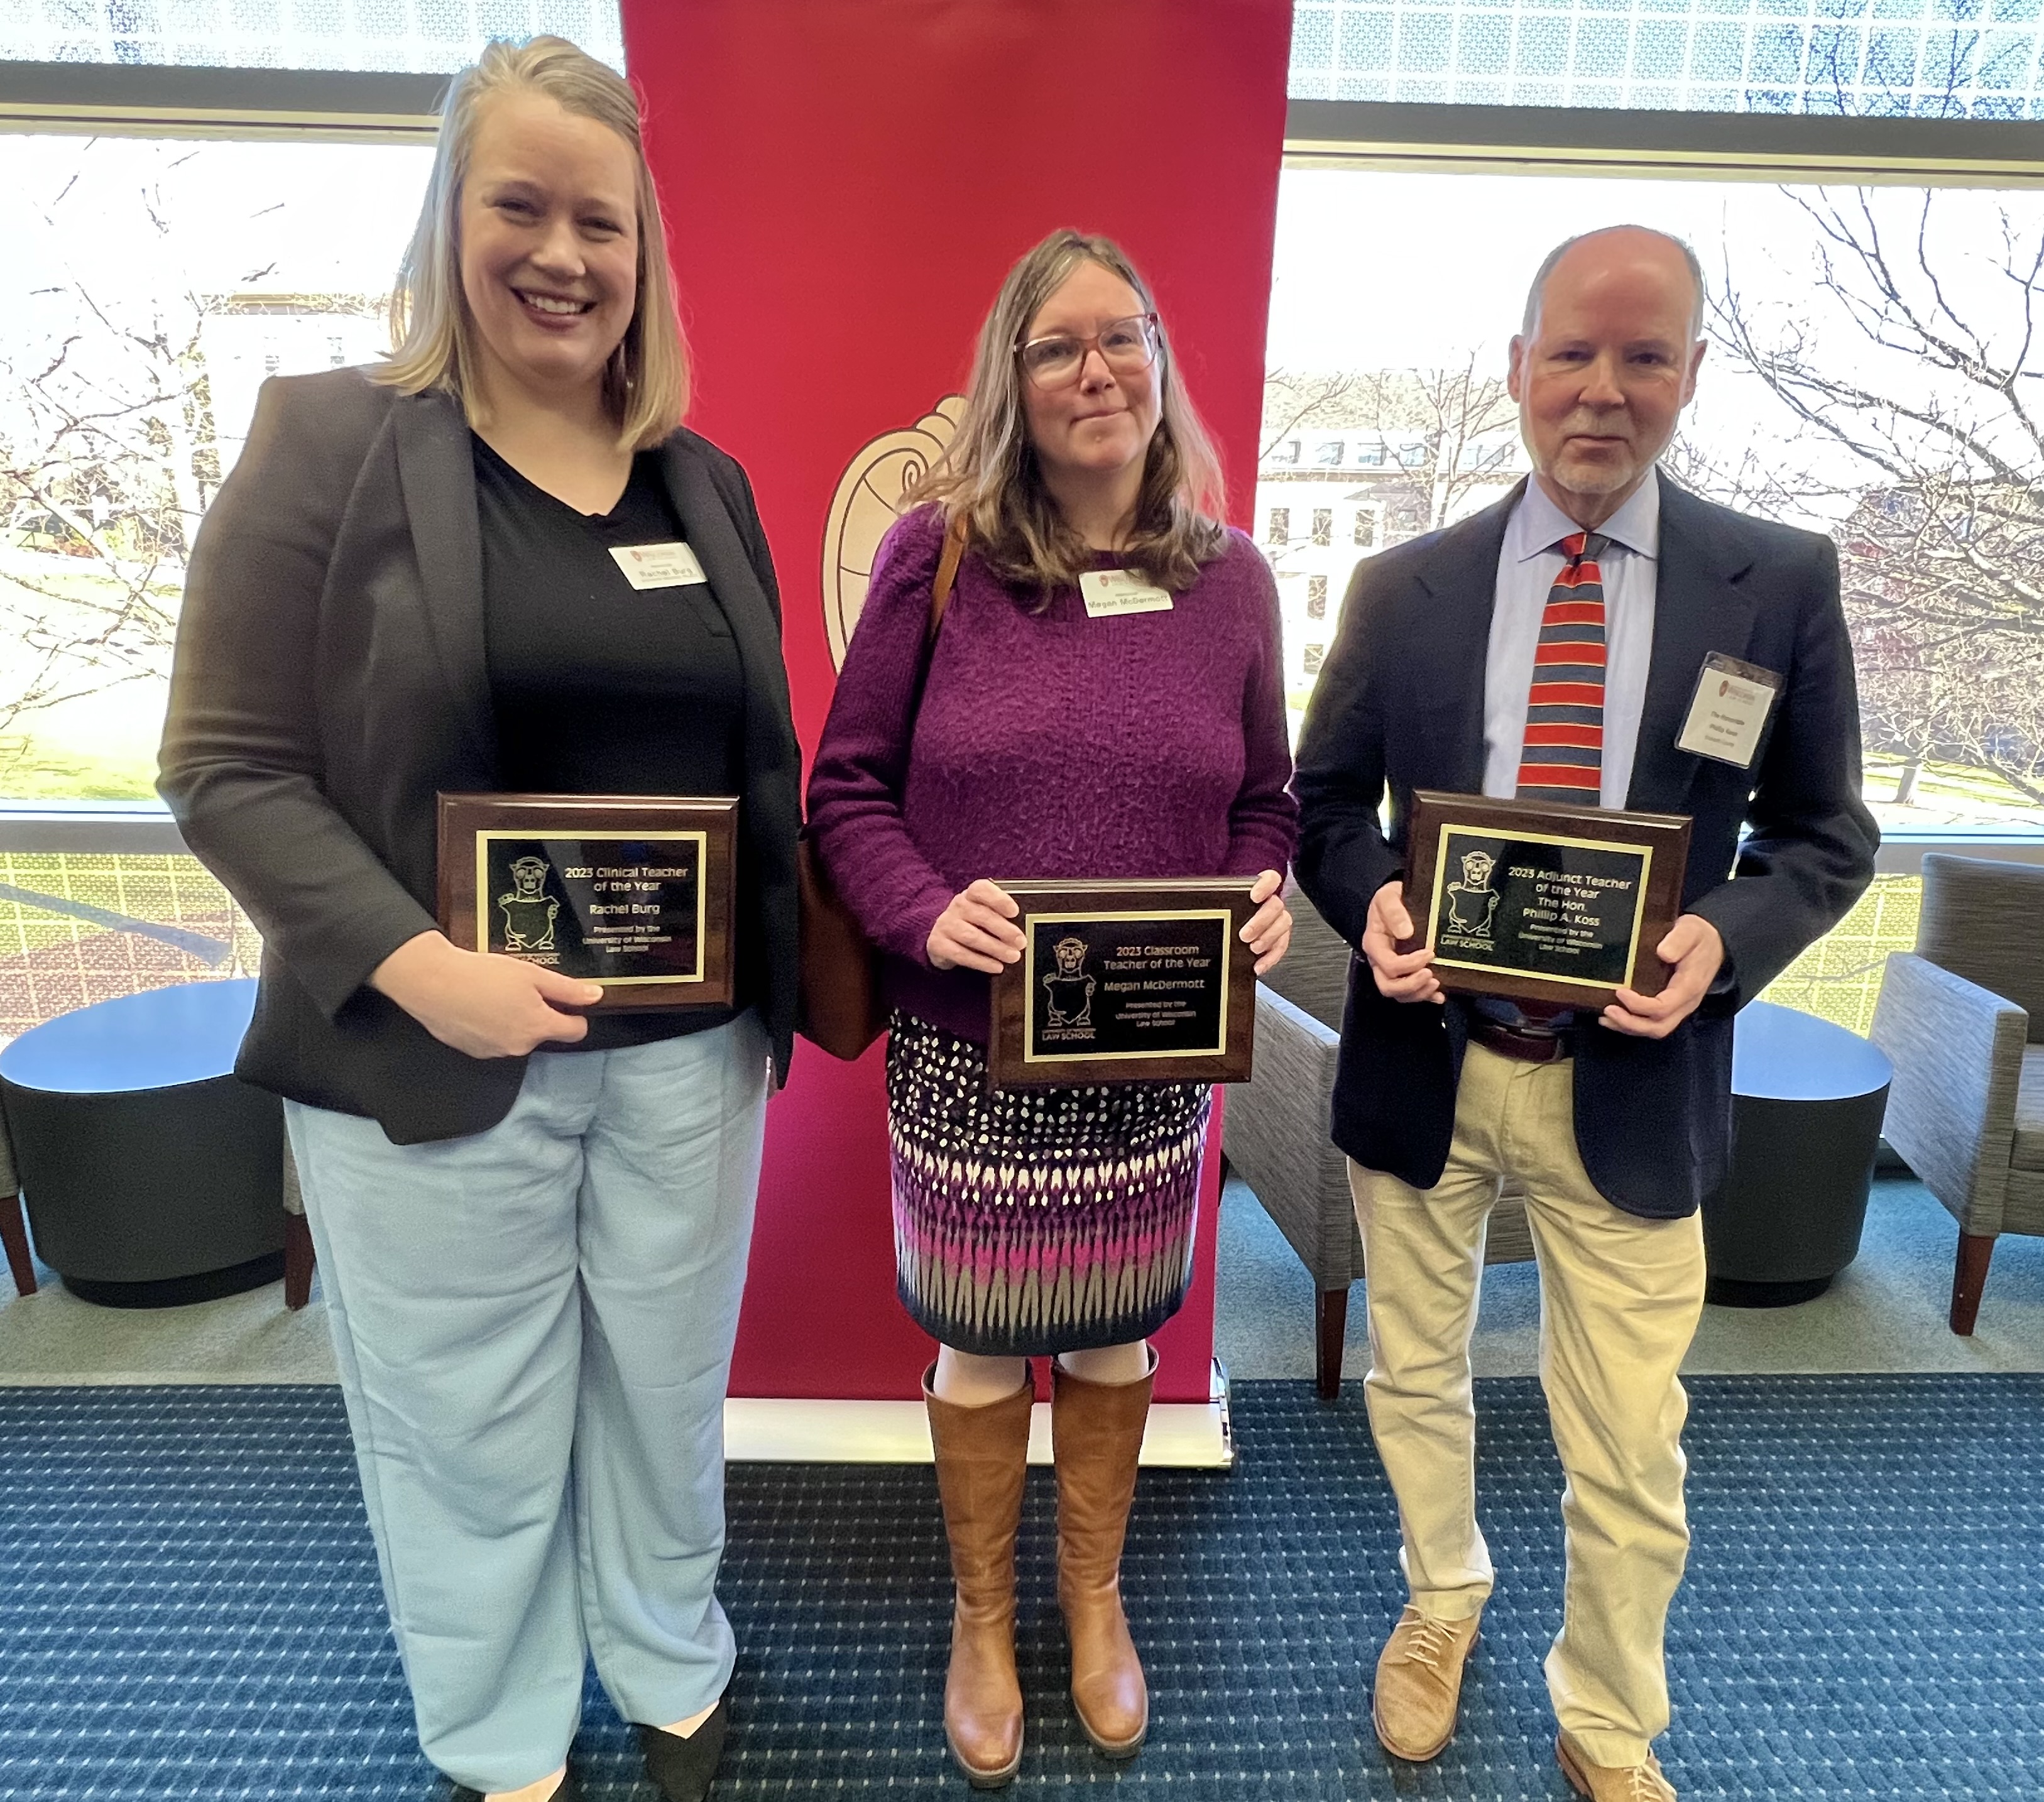 Three people stand together holding plaques for winning the UW Law Teacher of the Year Award. The first, starting from the left, is a tall, blonde woman wearing black with blue slacks and black shoes; the middle is an average height woman wearing purple and a patterned skirt with tall brown boots; and the third is a middle-aged man wearing a dark suit jacket over a light shirt, striped tie, and beige slacks and shoes.